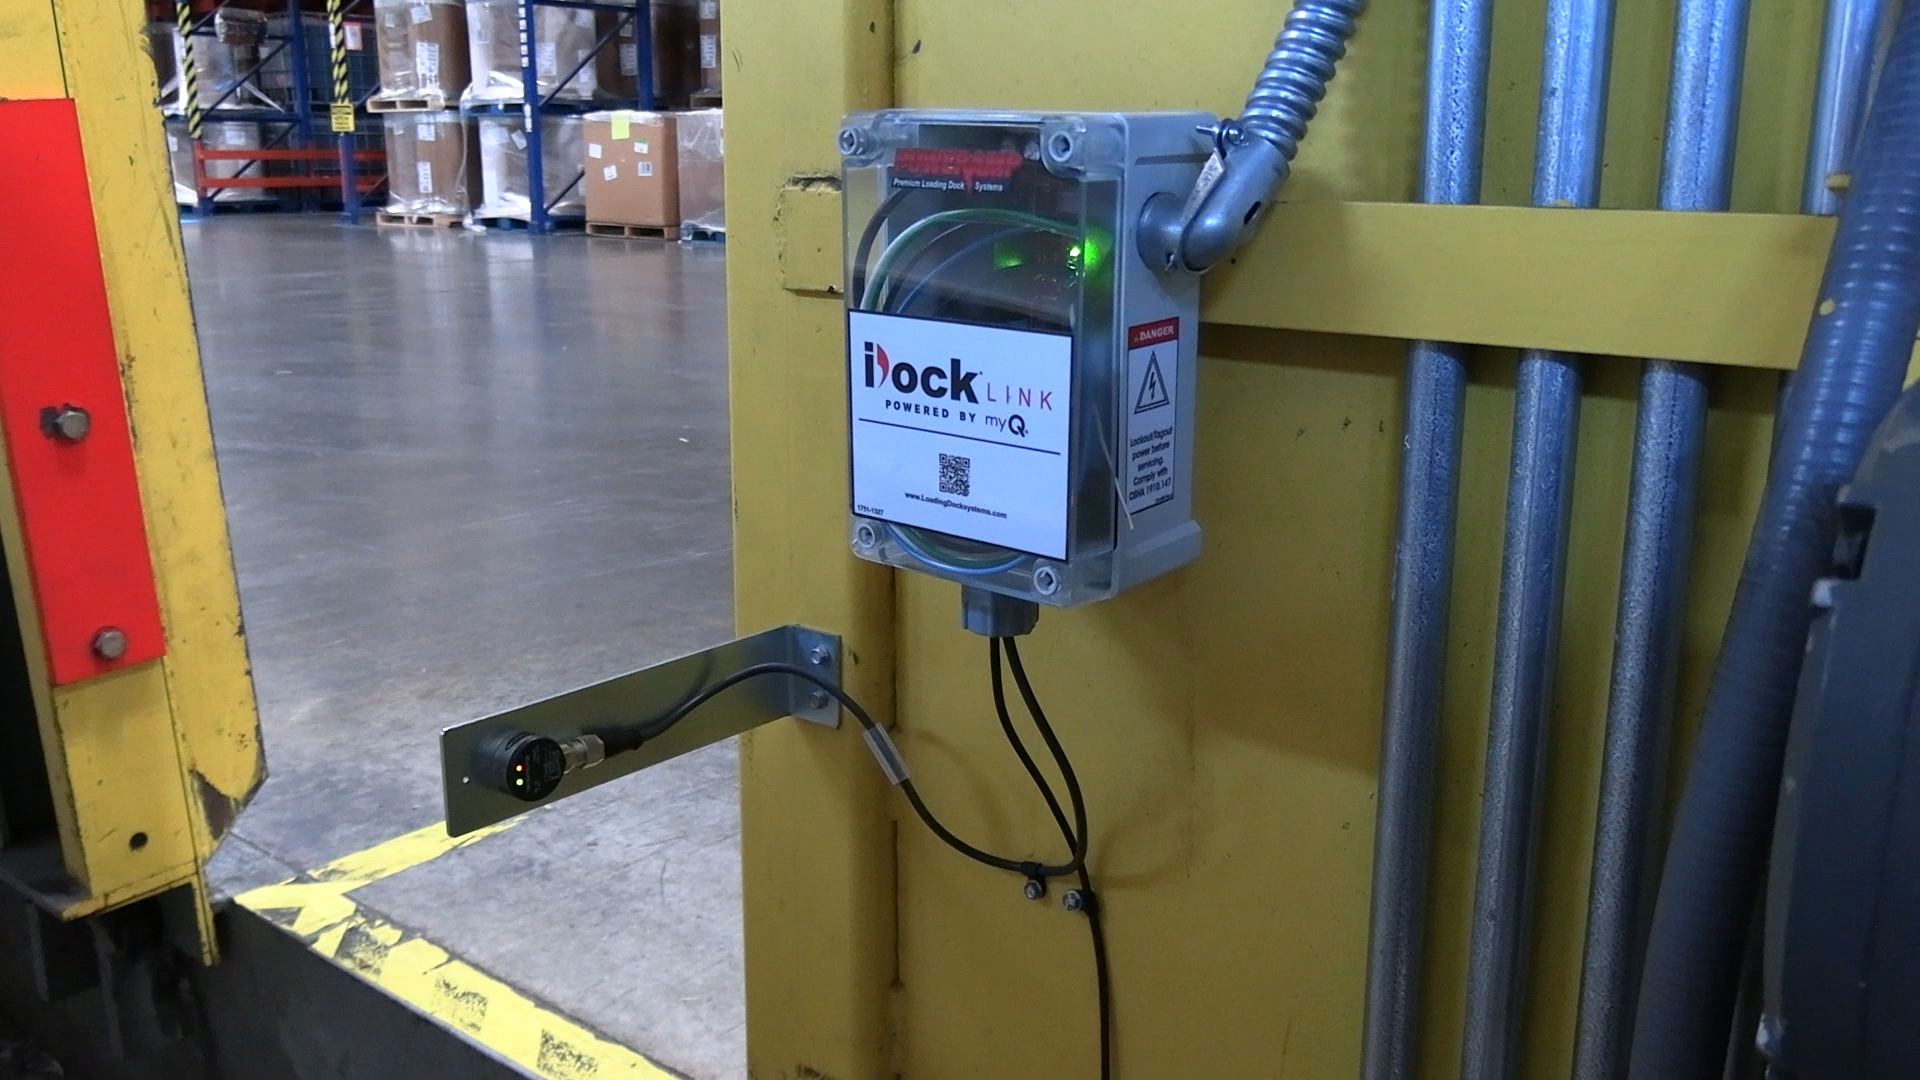 Mounted iDock Link with wires